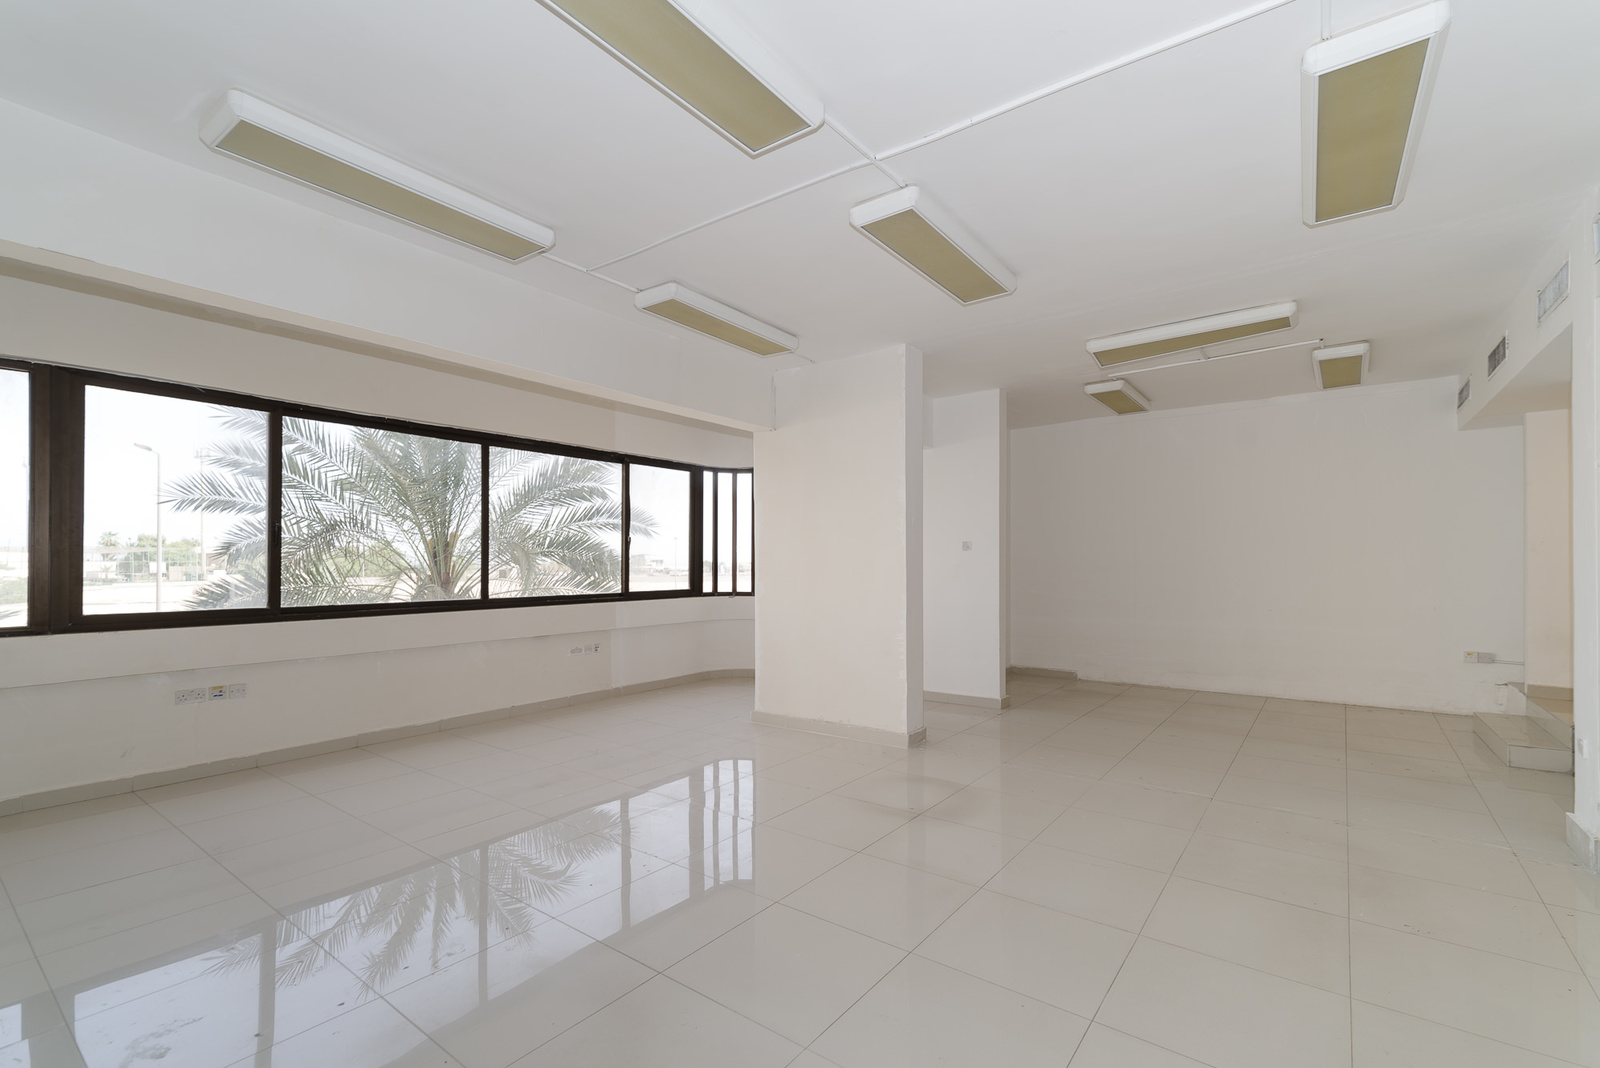 Bneid Al Gar – first and second floors for commercial use (240m2)